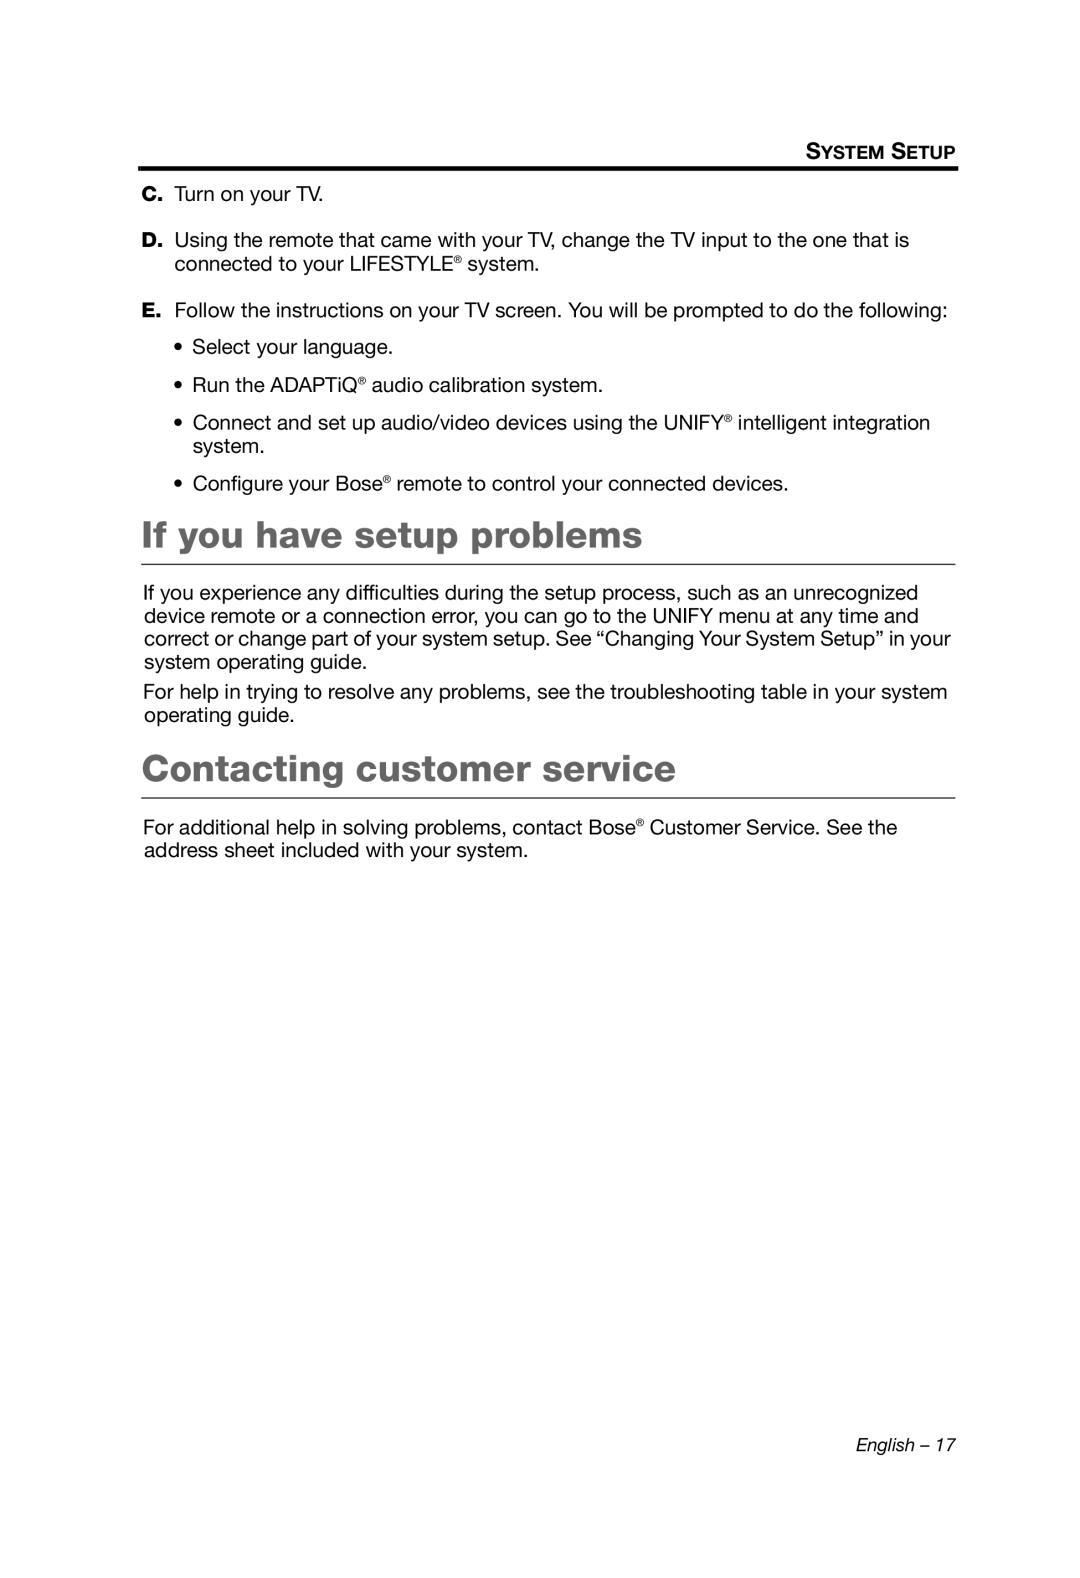 Bose 135 setup guide If you have setup problems, Contacting customer service 